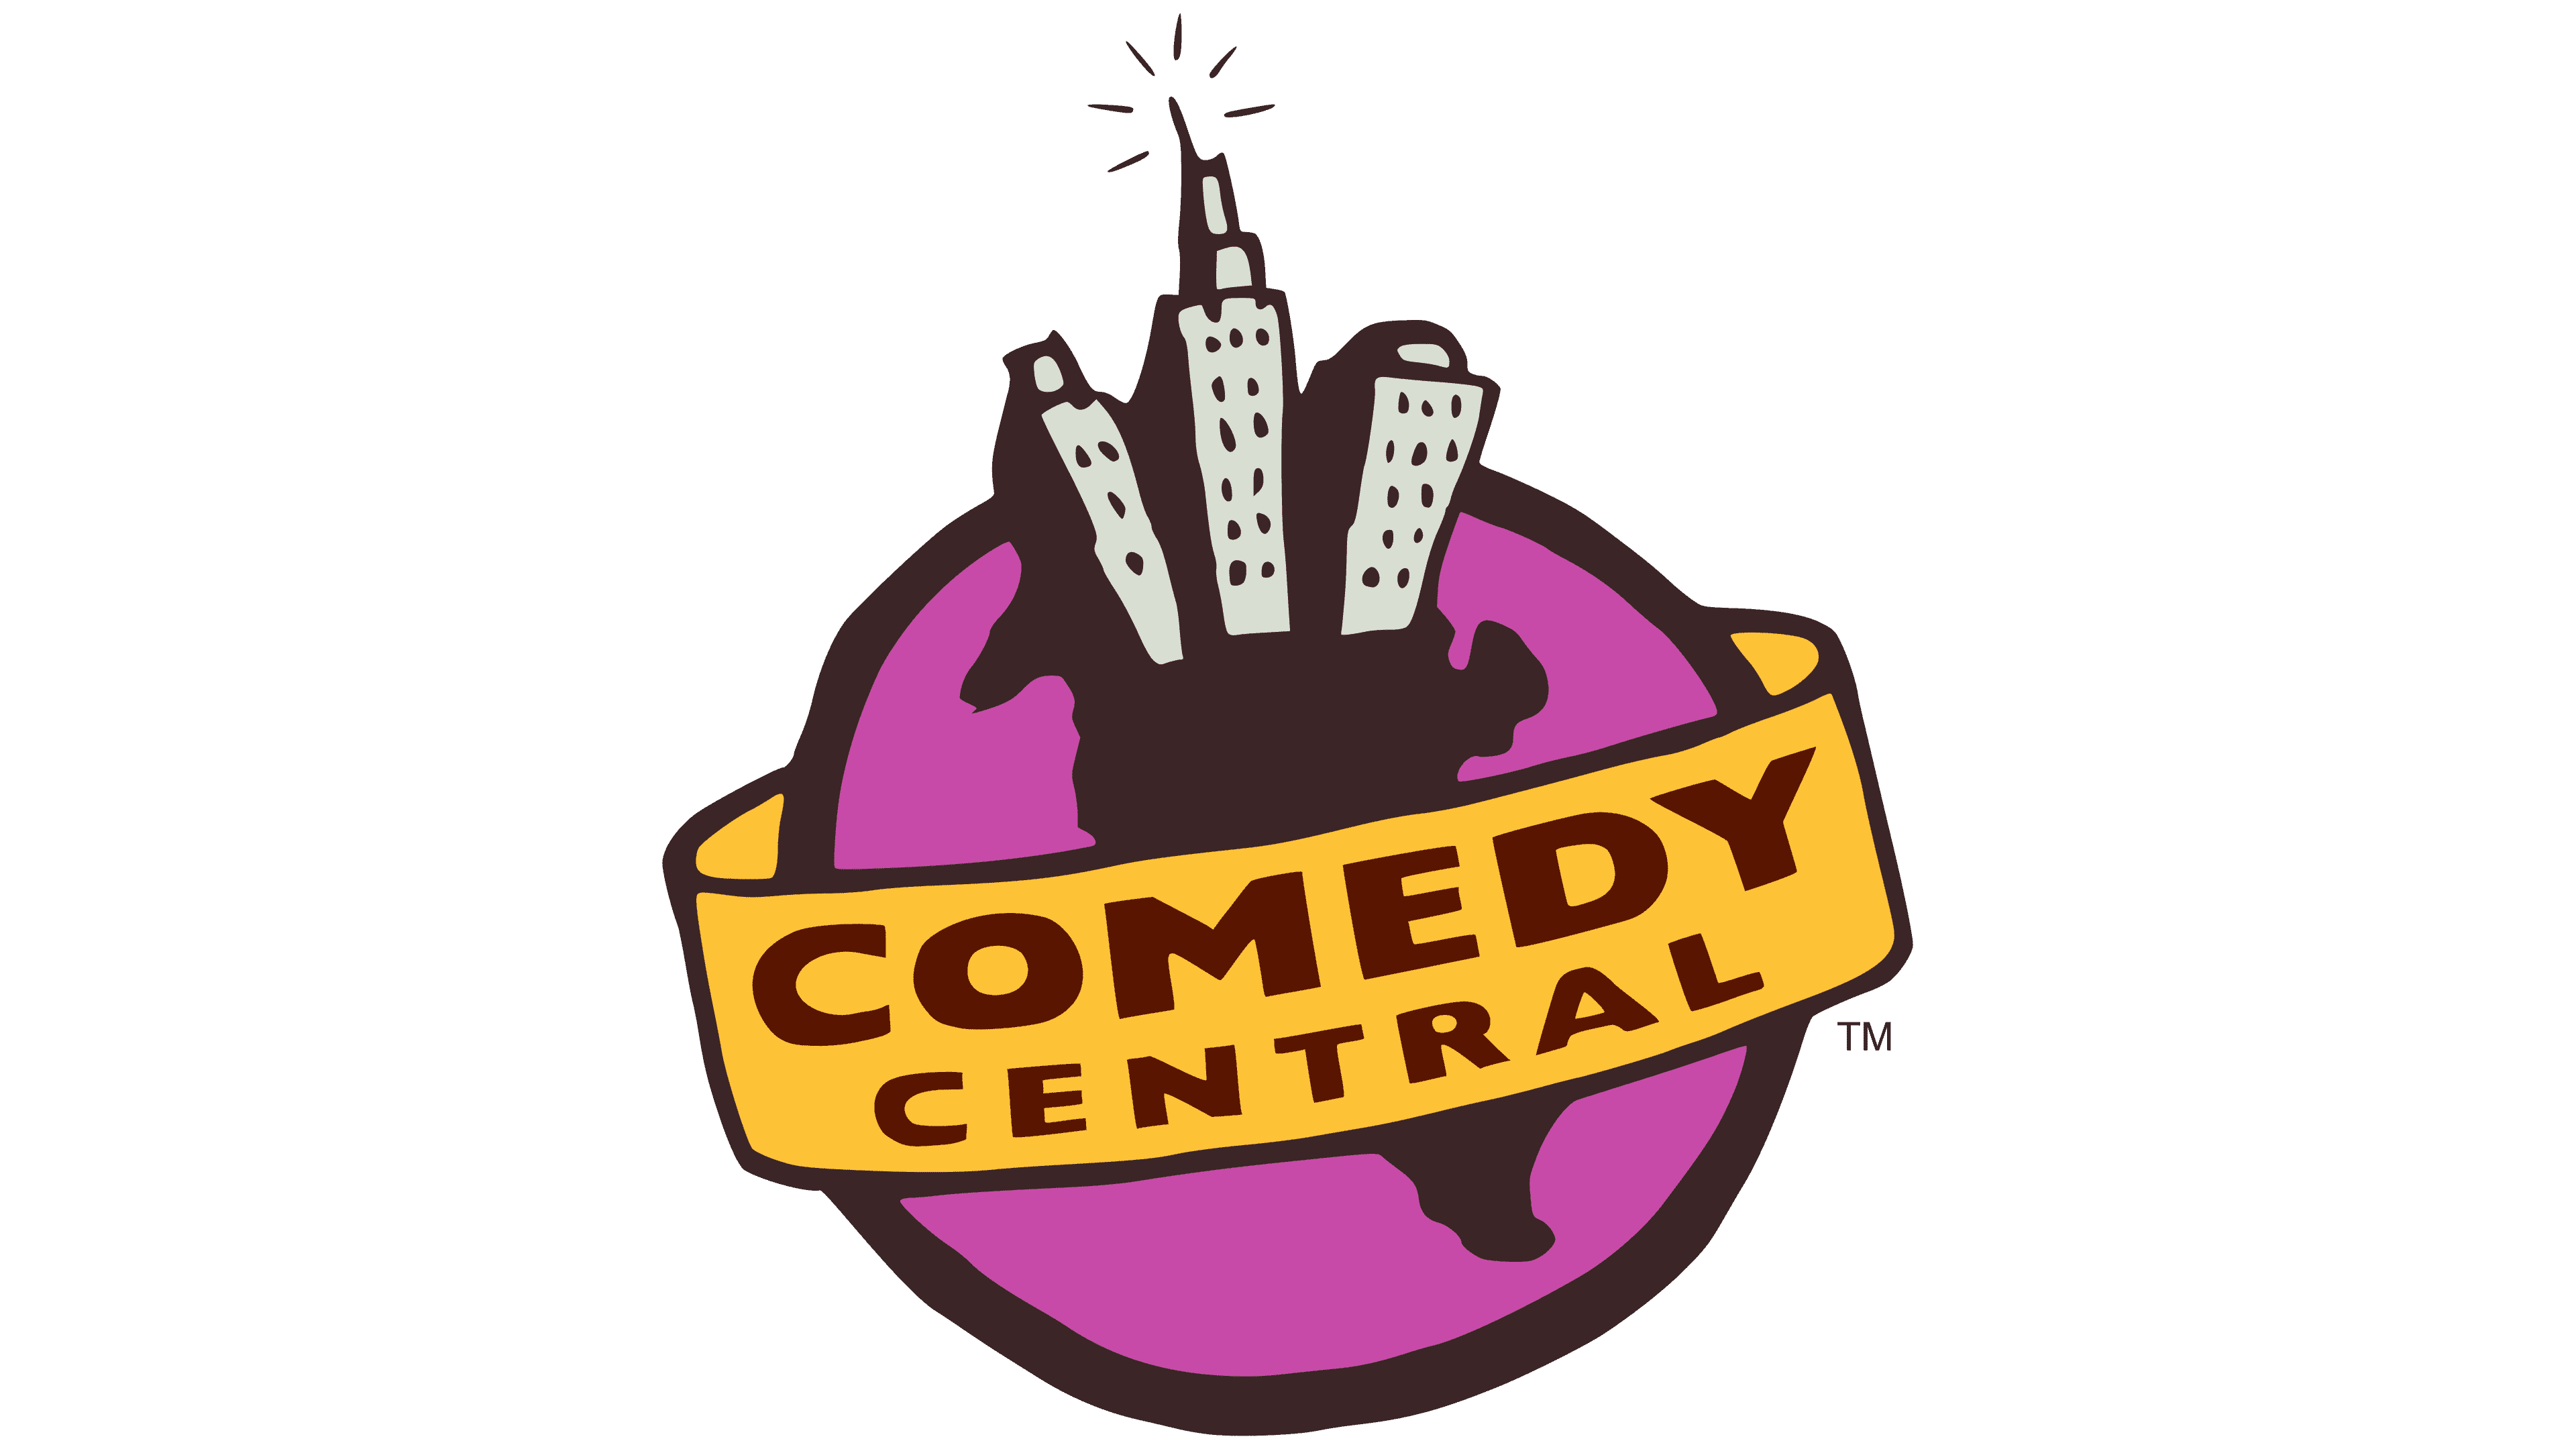 Comedy-Central-Logo-1991-1992.png